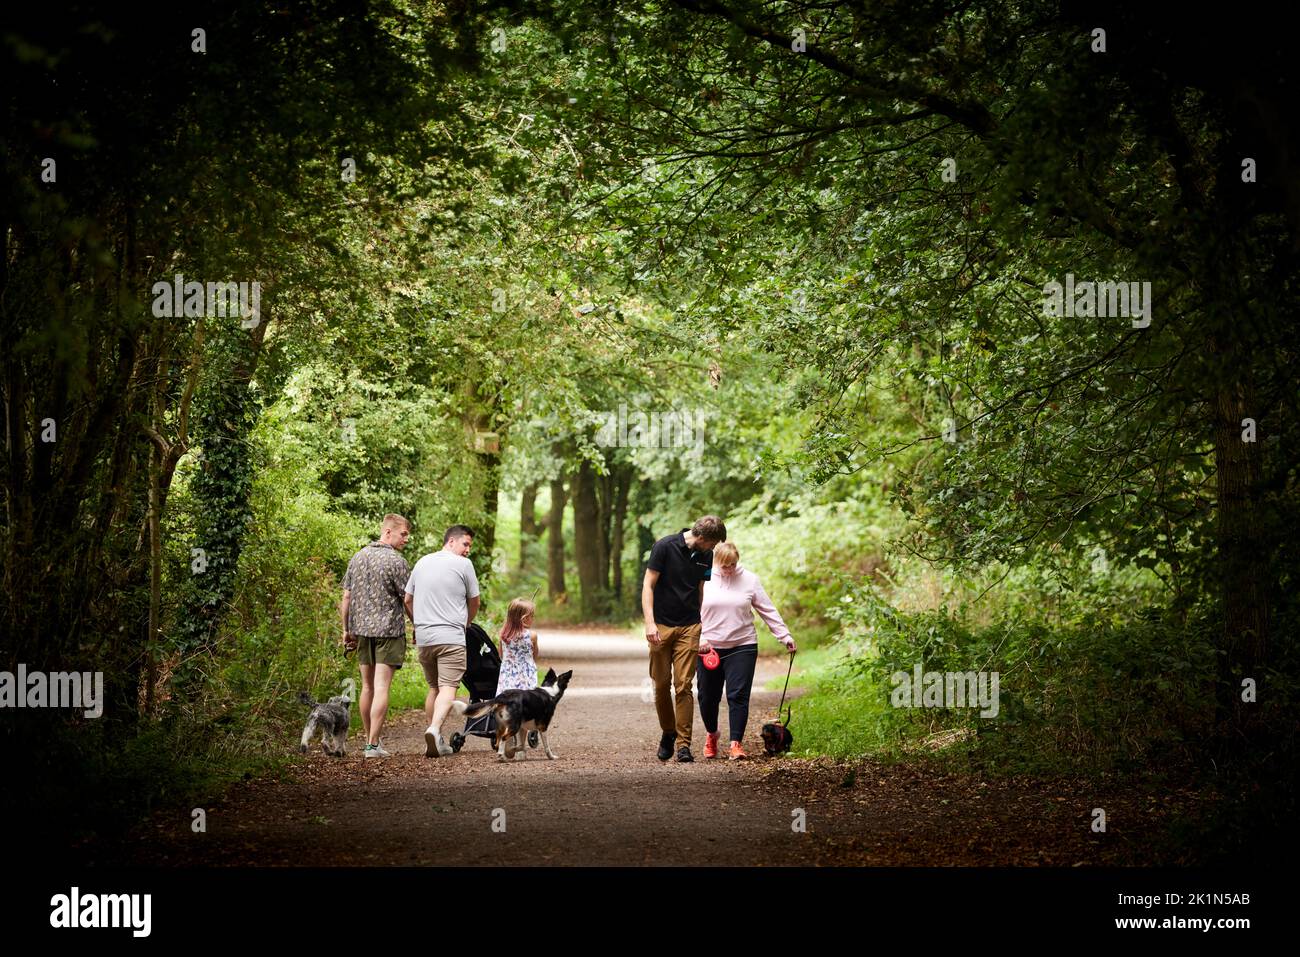 Alsager Cheshire East in Cheshire, England. Salt Line country walks Stock Photo